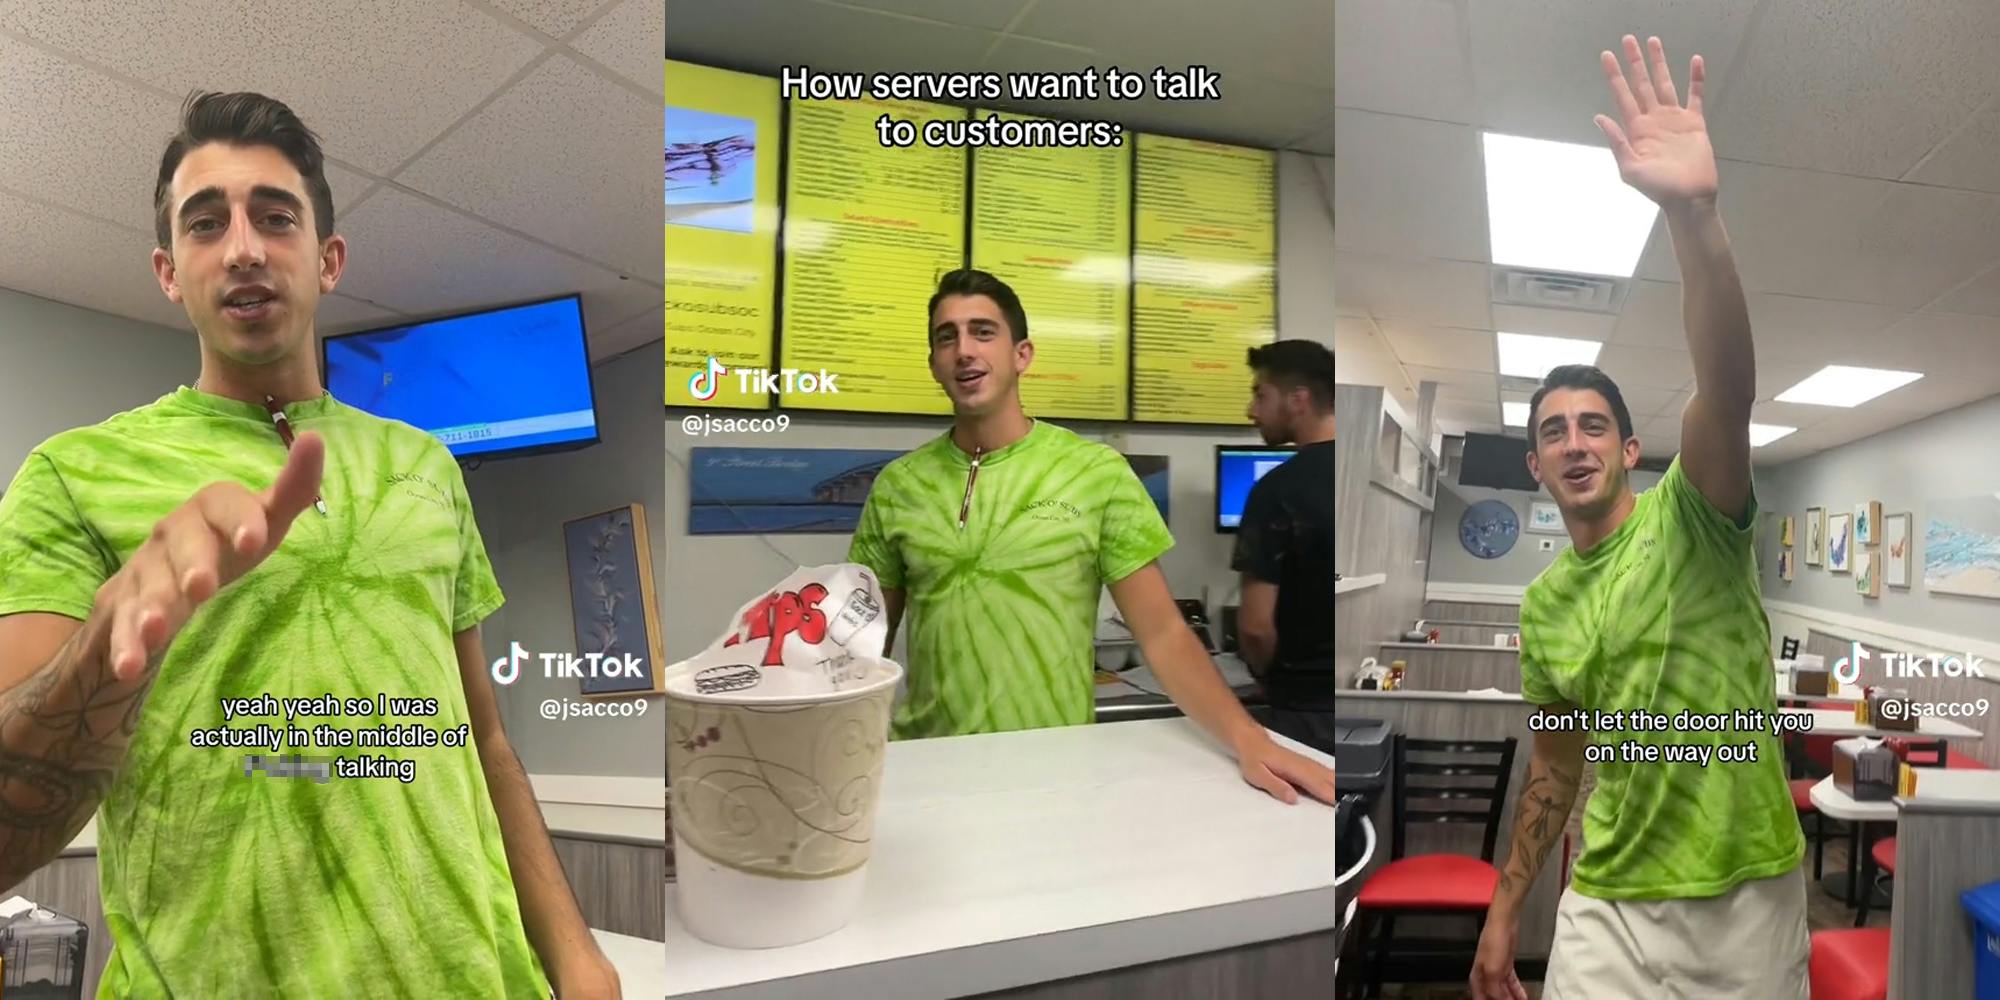 man with "yeah yeah so I was actually in the middle of fucking talking" (l) man behind counter with caption "How servers want to talk to customers" (c) man waving with caption "don't let the door hit you on the way out" (r)